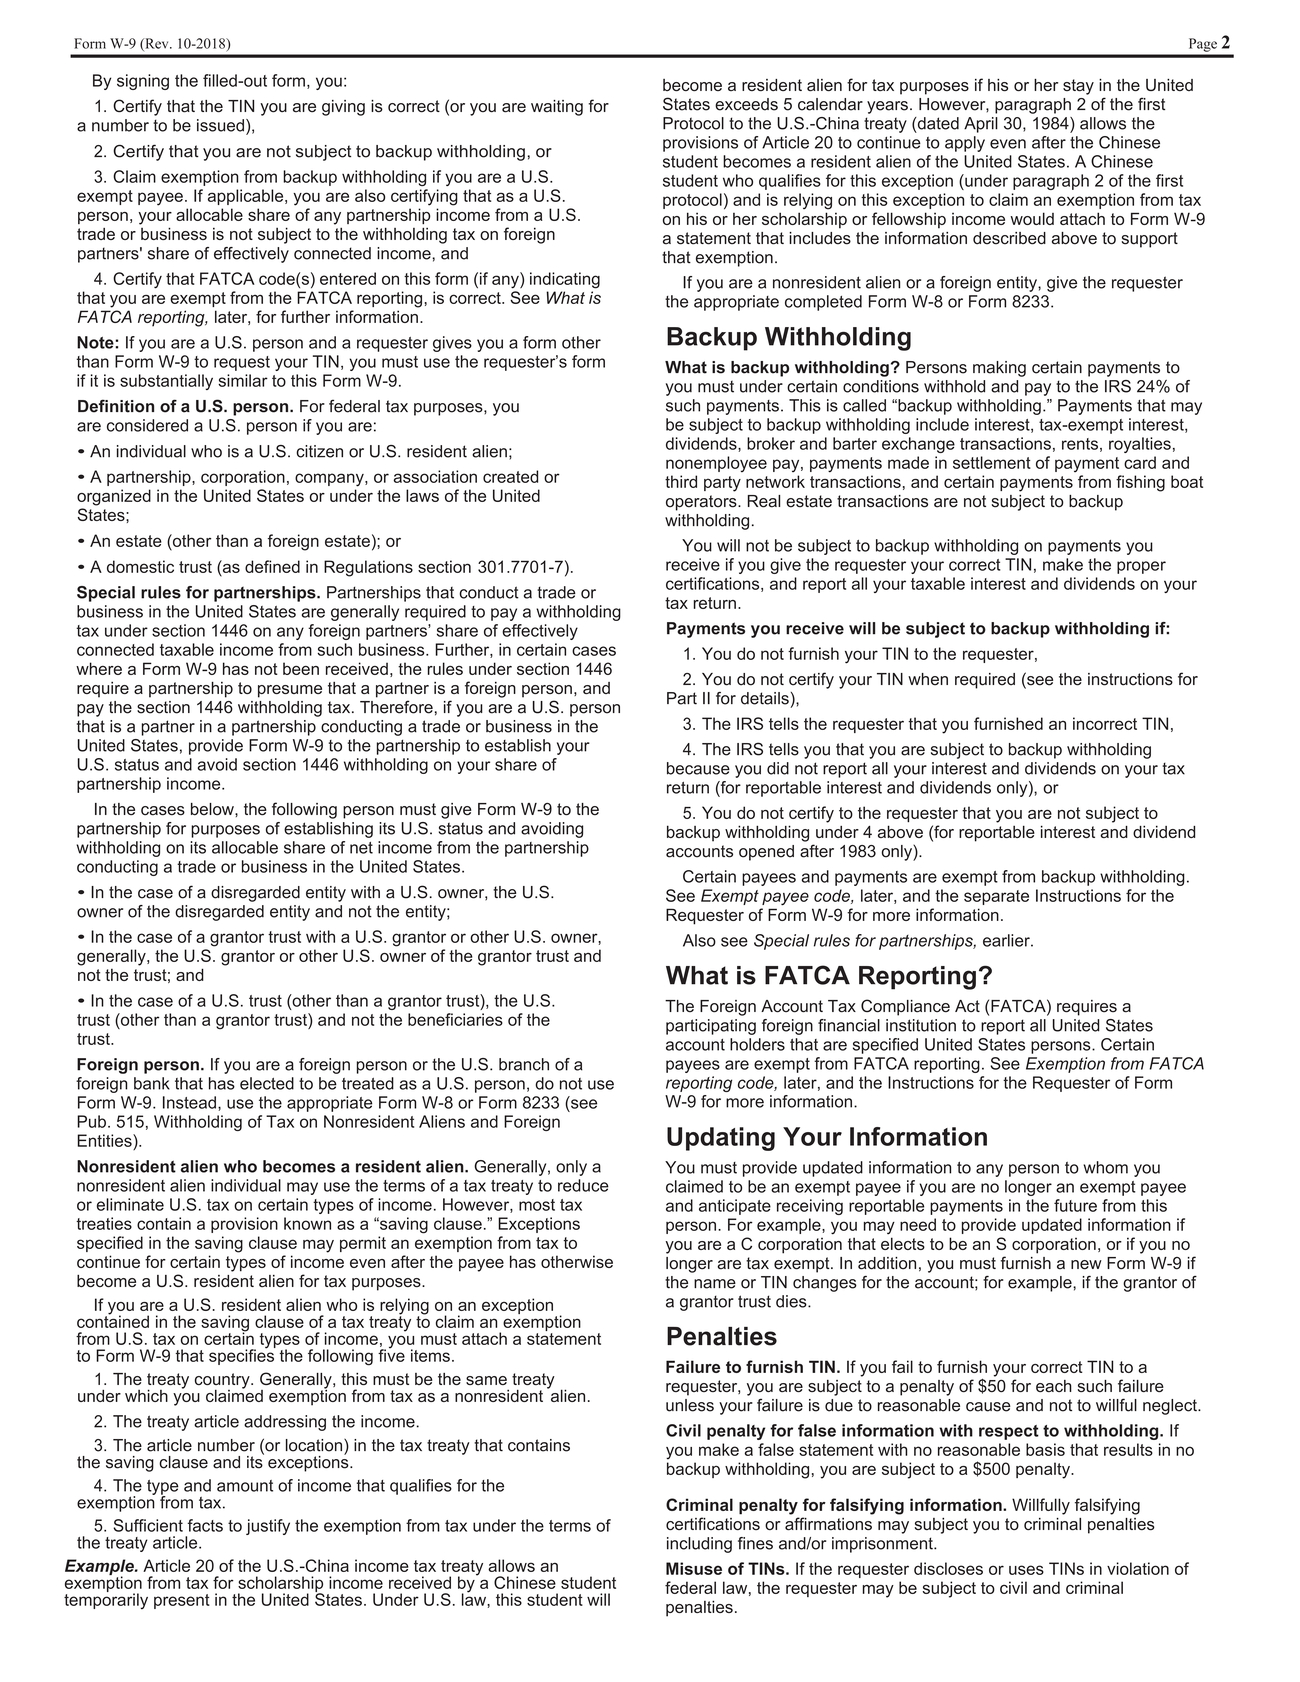 New Microsoft Word Document_exhibitpage099_page002.jpg